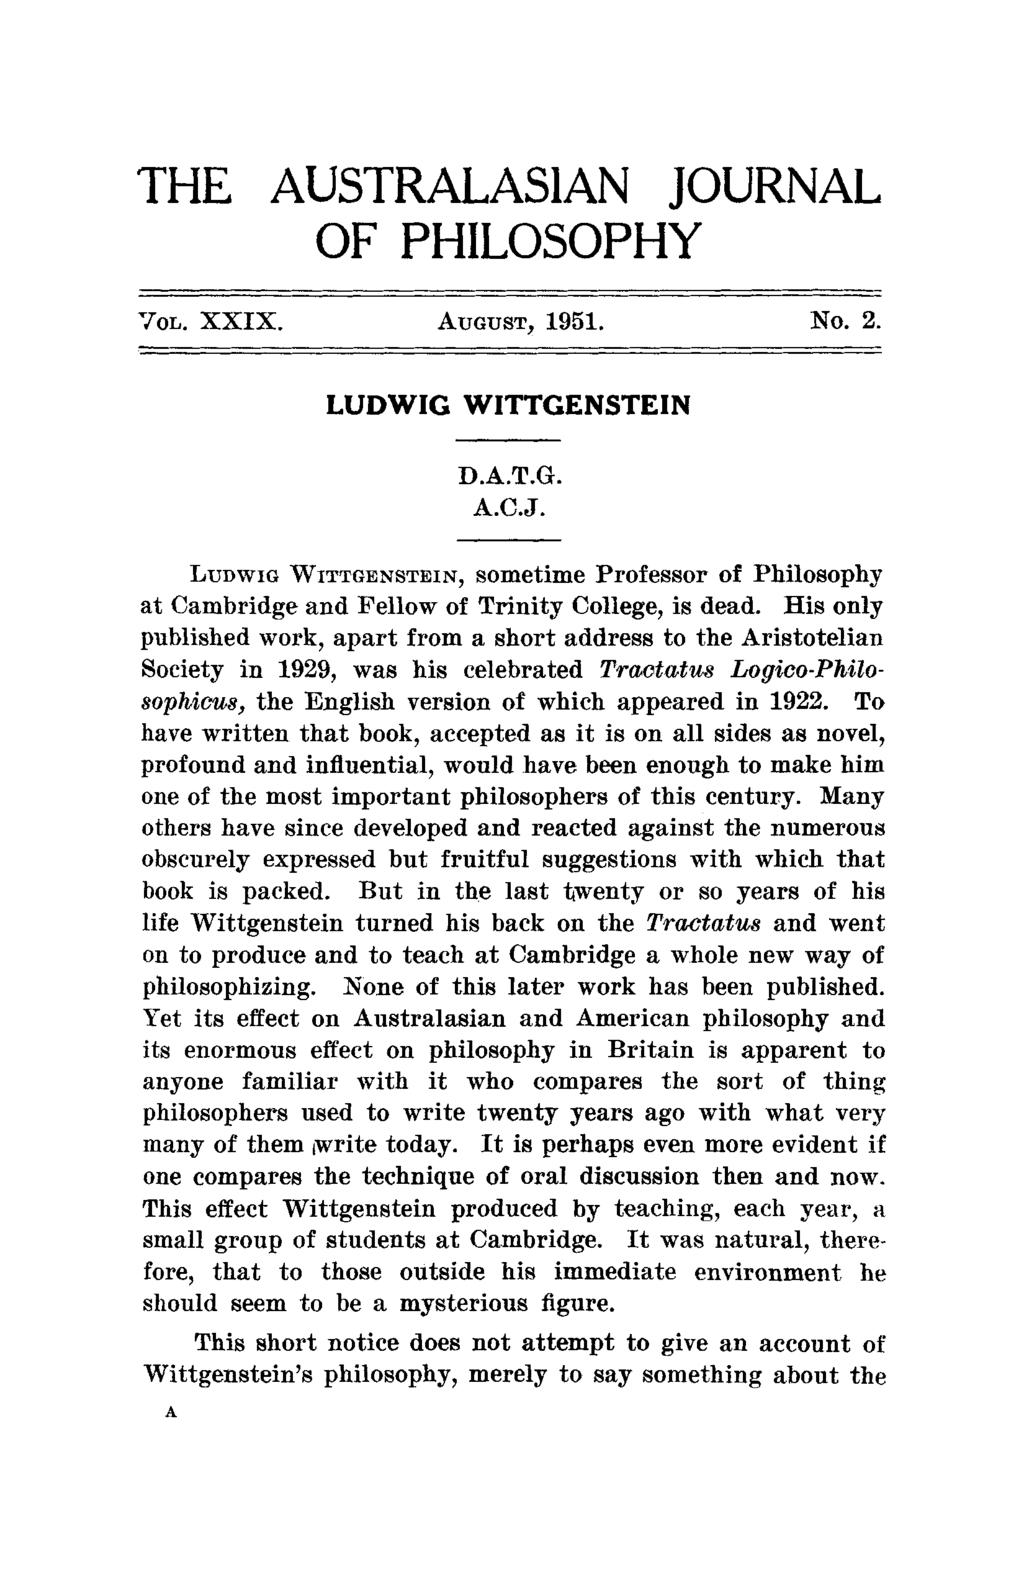 THE AUSTRALASIAN JOURNAL OF PHILOSOPHY VOL. XXIX. AUGUST, 1951. NO. 2. LUDWIG WITTGENSTEIN D.A.T.G. A.C.J. LUDWIG WITTGENSTEIN, sometime Professor of Philosophy at Cambridge and Fellow of Trinity College, is dead.